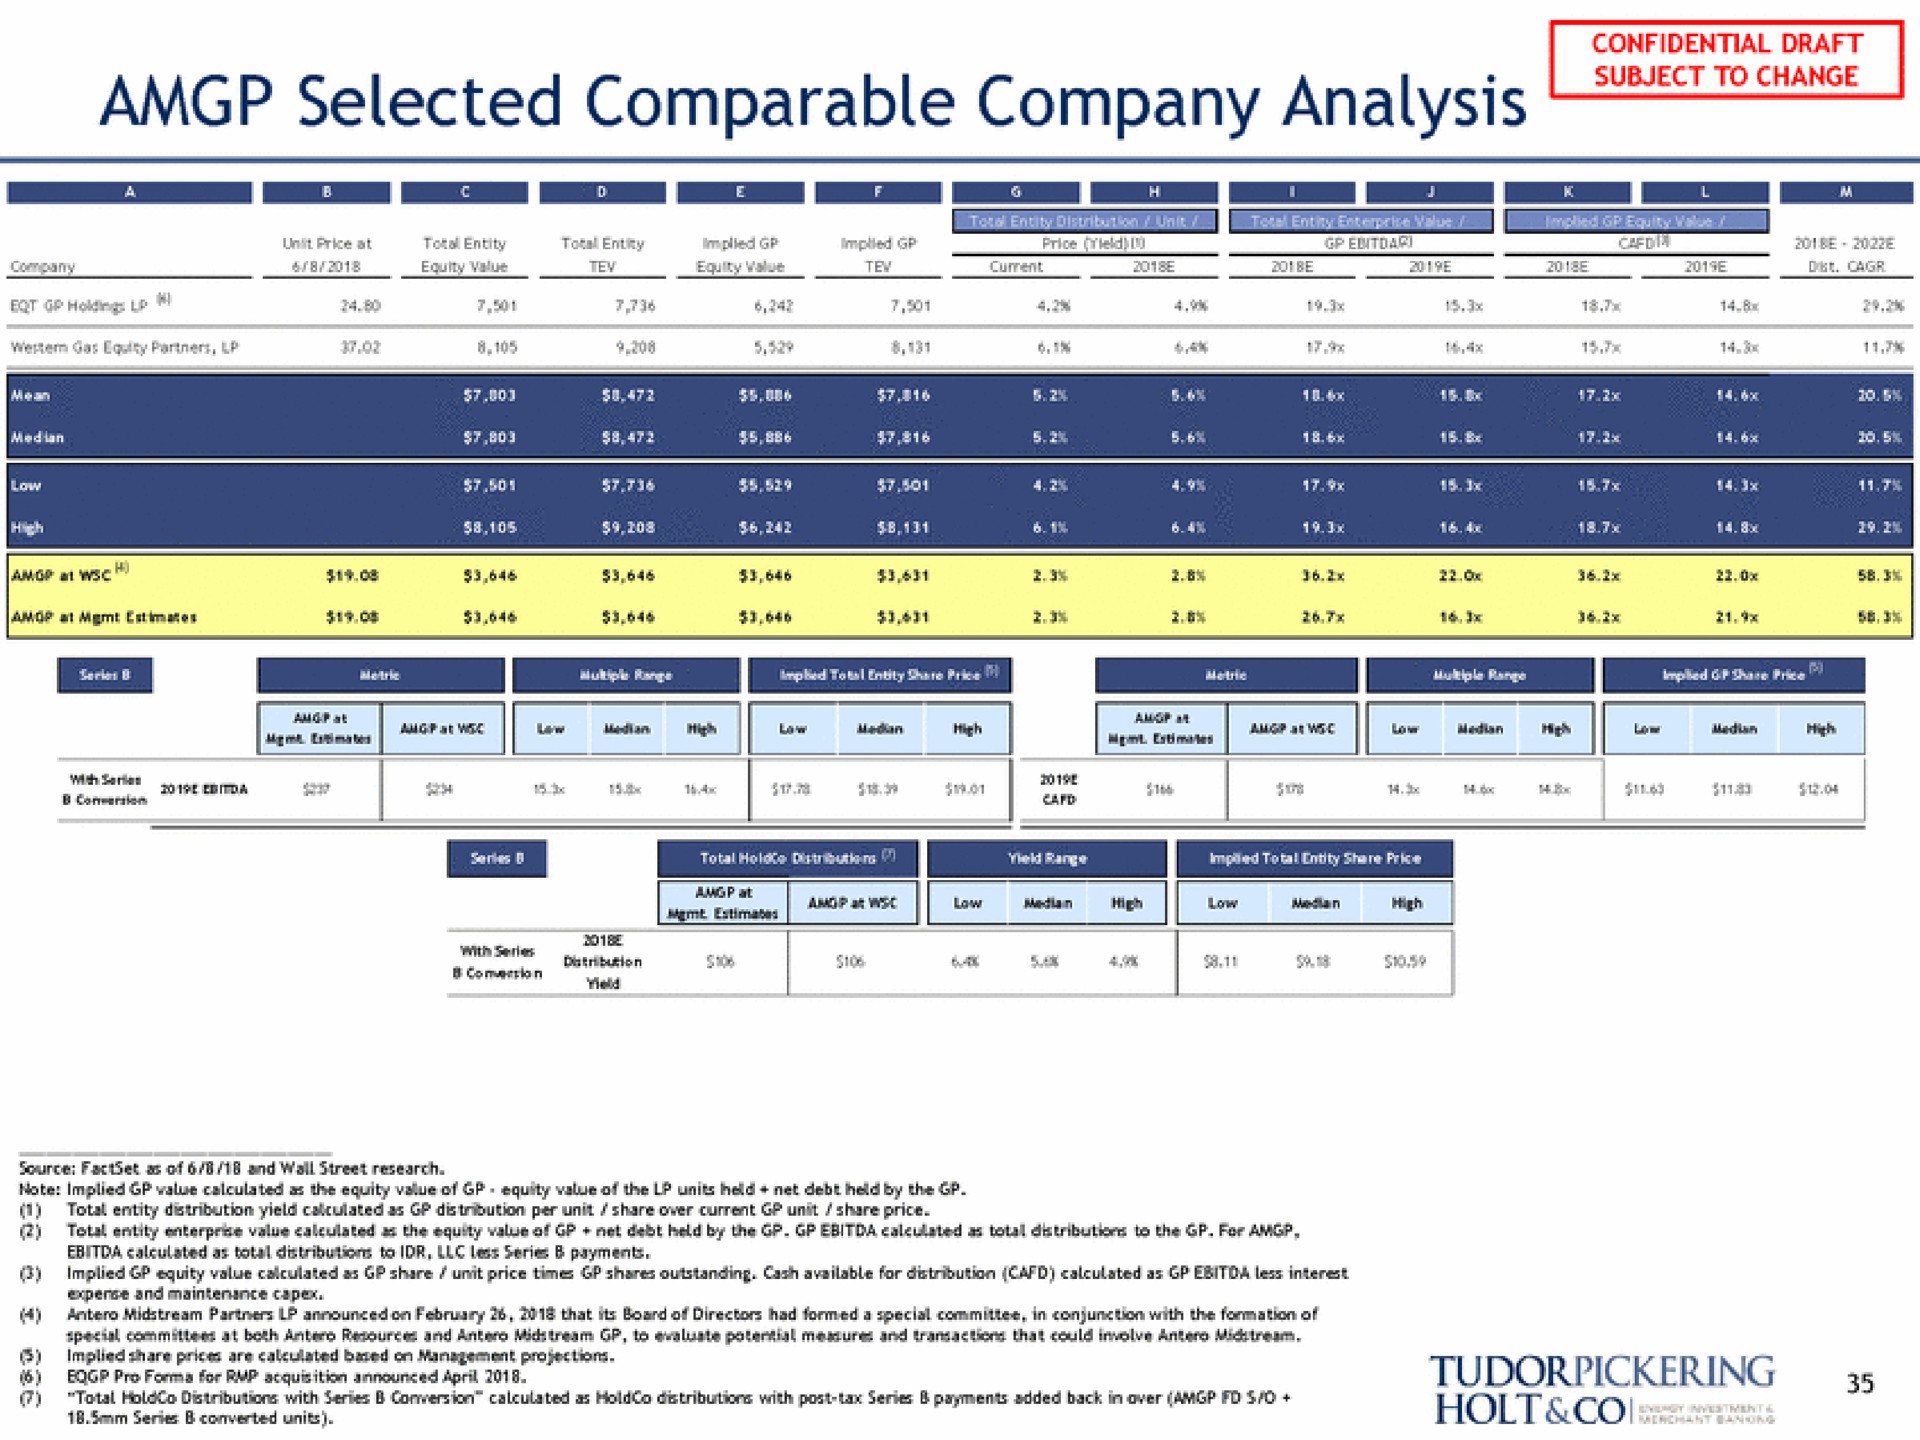 selected comparable company analysis subject to change | Tudor, Pickering, Holt & Co